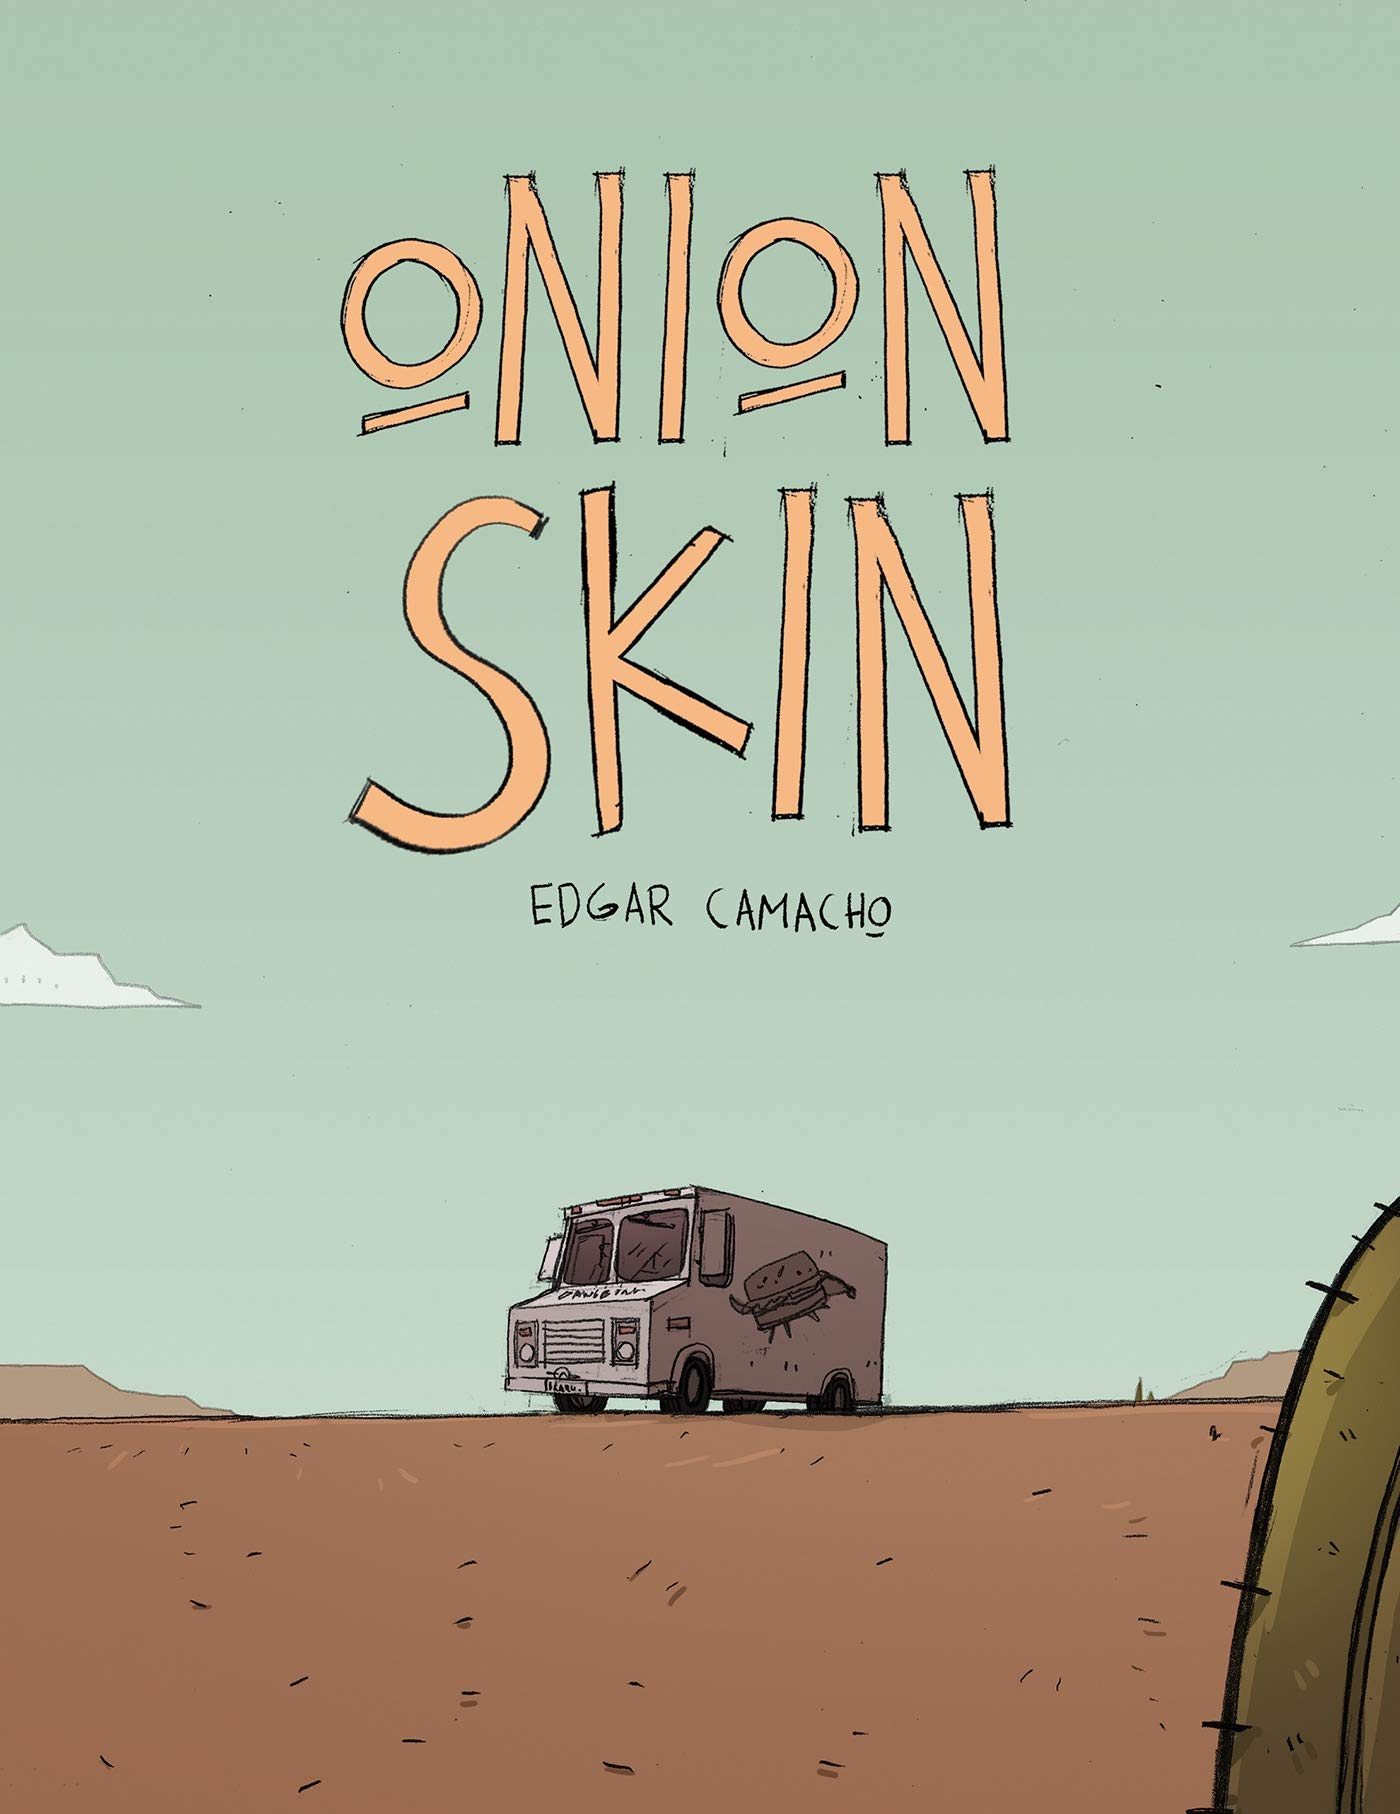 Image for "Onion Skin"